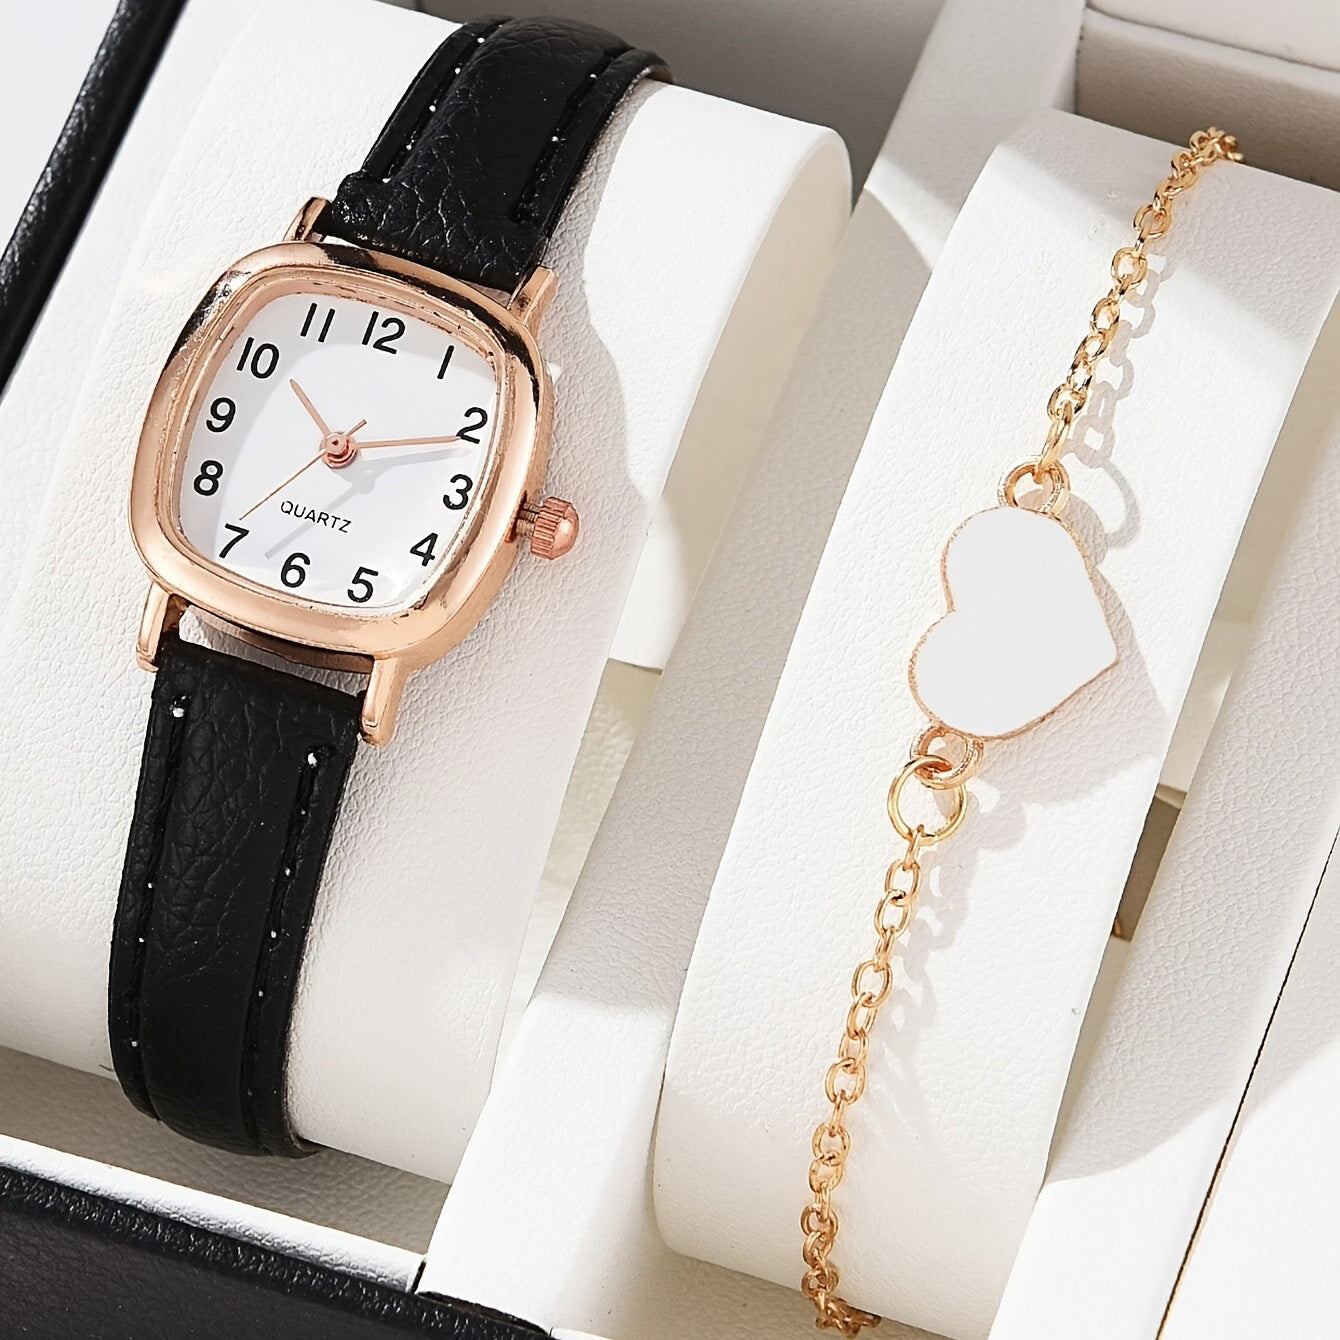 Elegant retro women's wristwatch with square dial and leather strap